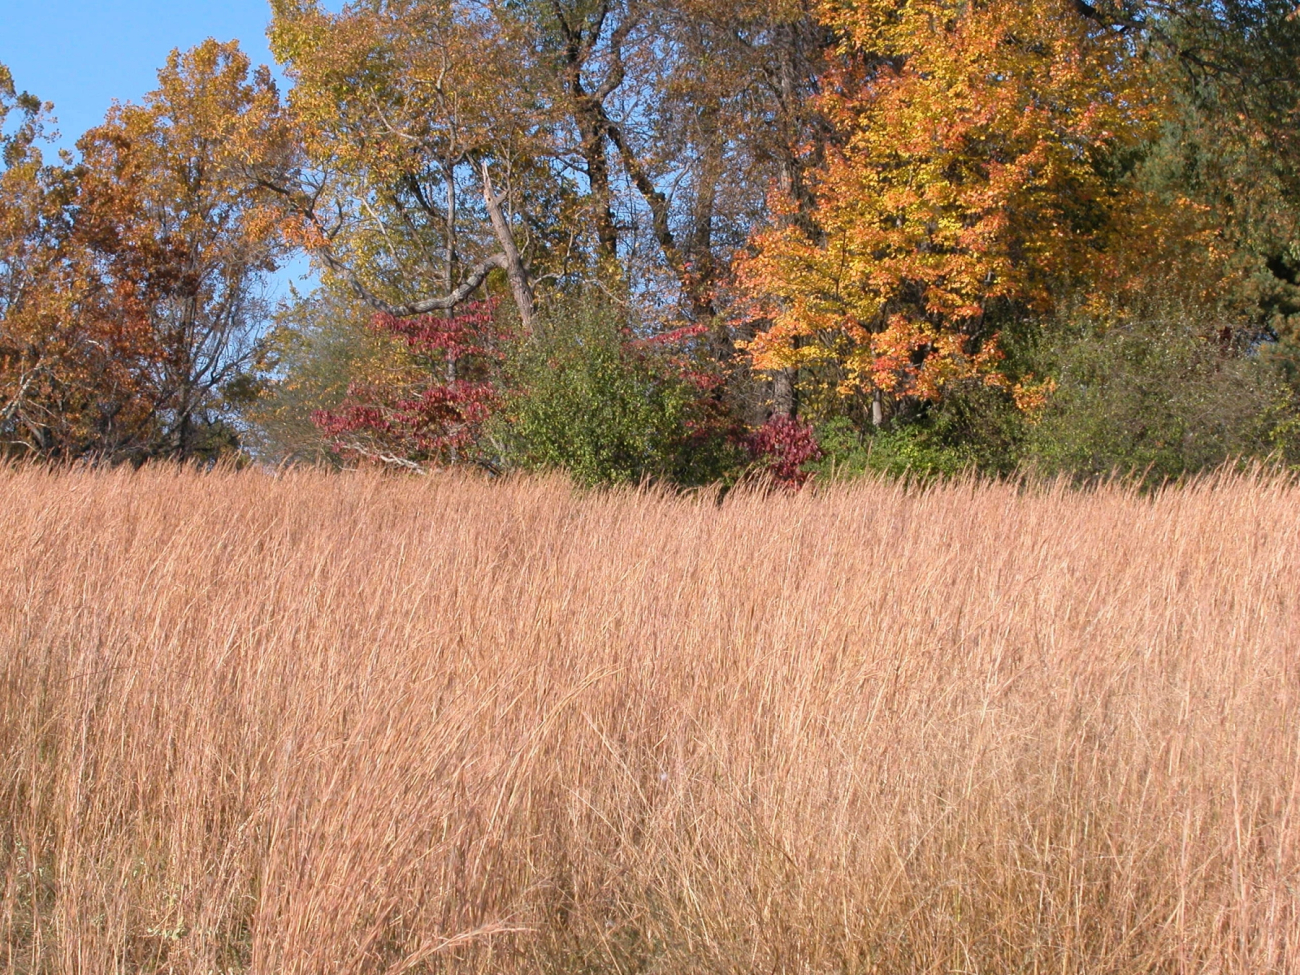 A field of golden grass and fall colors on an autumn afternoon